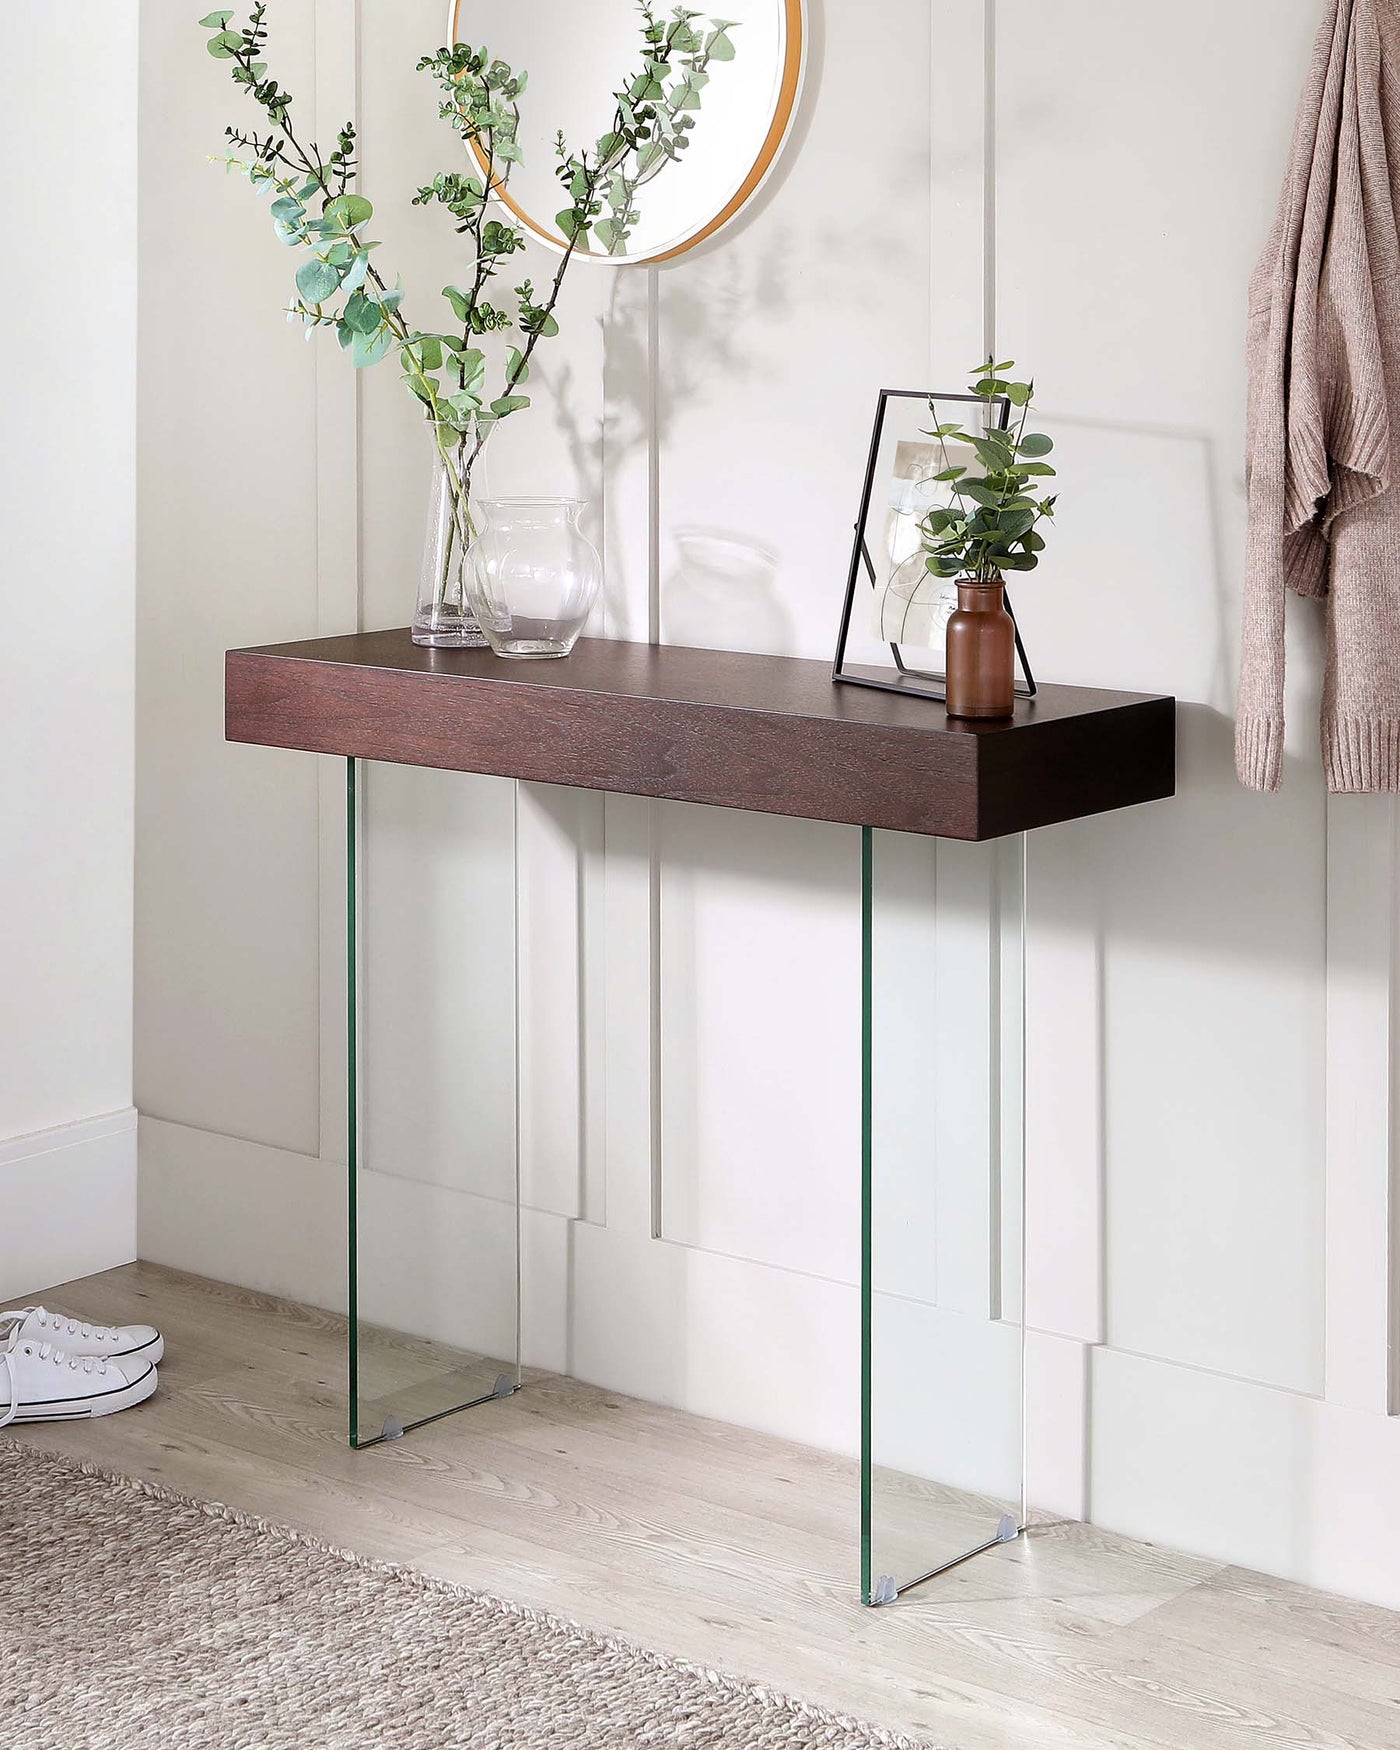 A modern minimalist console table with a rich dark brown wooden tabletop and sleek, clear glass legs. The tabletop is styled with decorative items including a vase containing greenery, a glass candle holder, a picture frame, and a small potted plant. The console sits against a light wall above a light wood floor, complemented by a round mirror and a light beige throw hanging beside it.